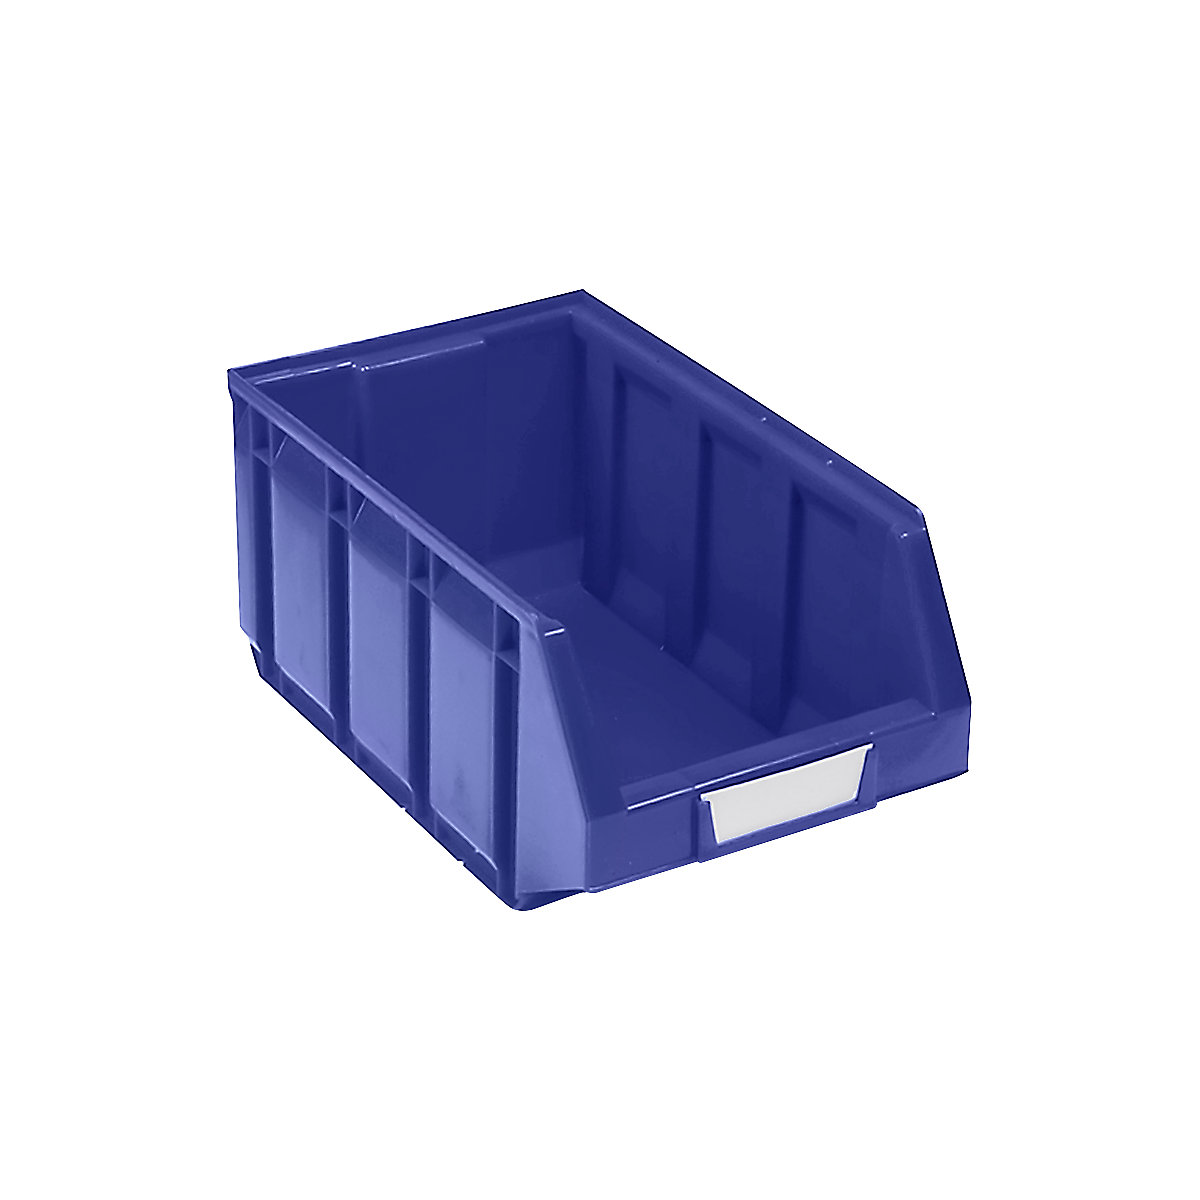 Open fronted storage bin made of polyethylene, LxWxH 345 x 205 x 164 mm, blue, pack of 24-11